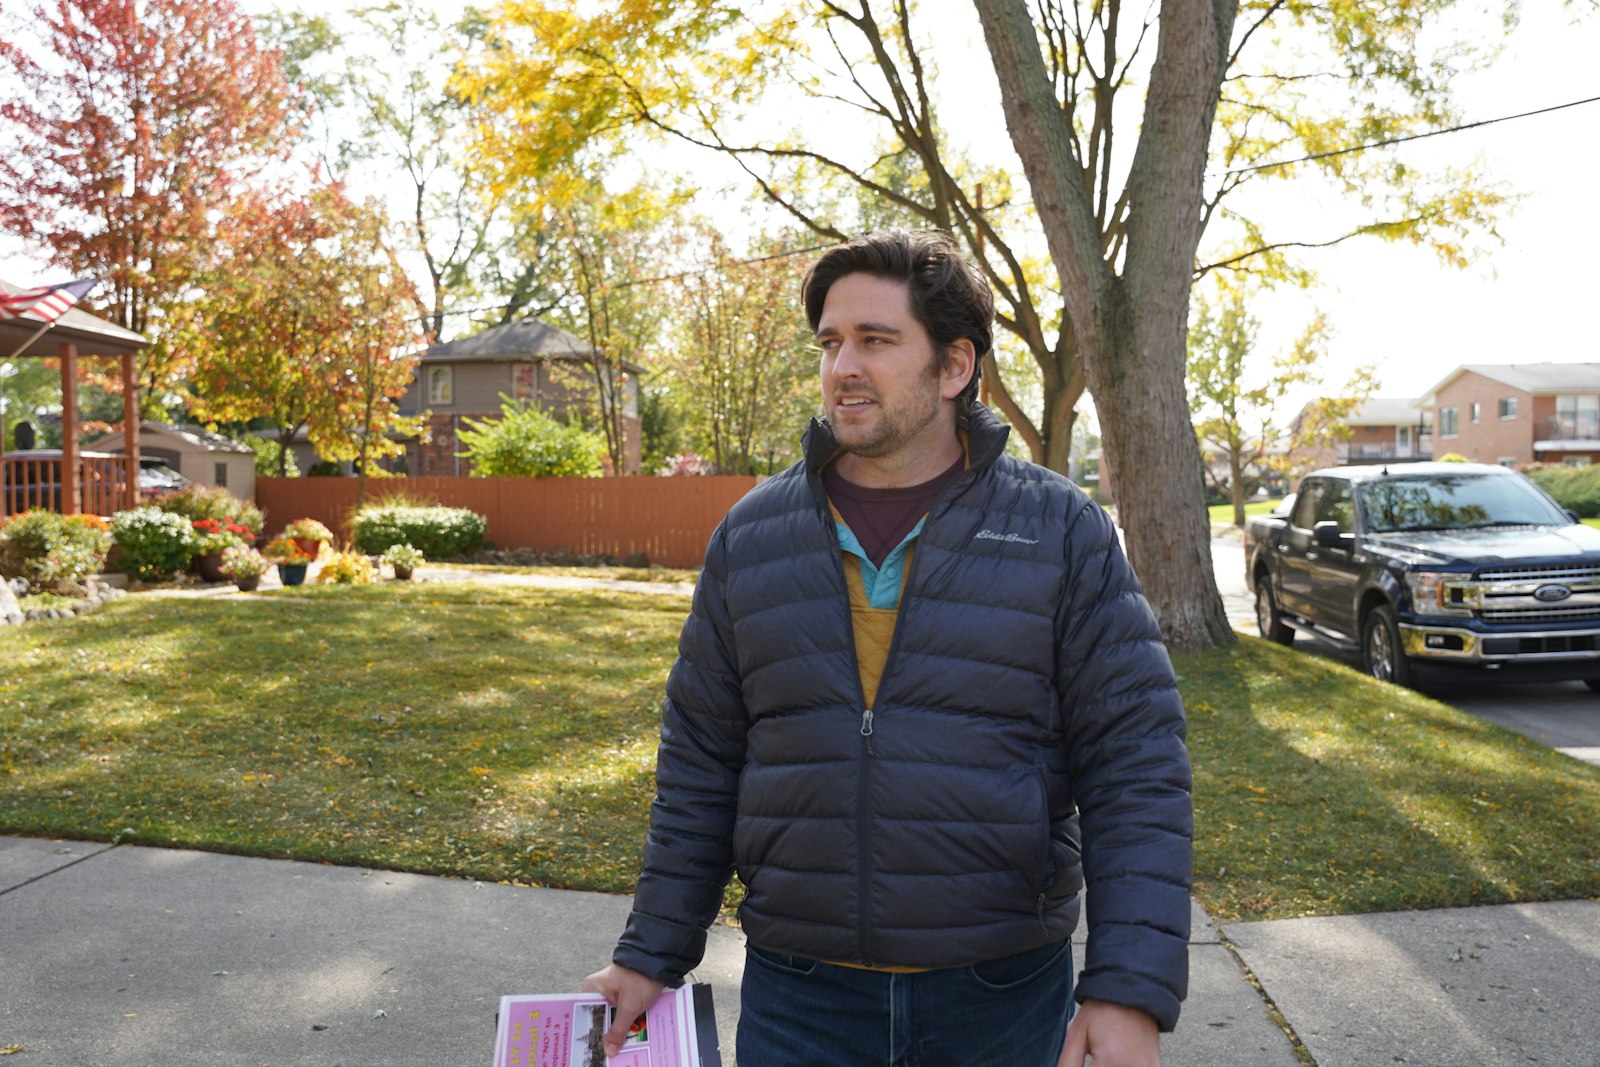 James Wilson of Royal Oak walks through his neighborhood to canvass against Proposal 3. Polling data shows support for Proposal 3 shrinking to 52%, down from 61% in early October. Citizens to Support MI Women and Children, a grassroots coalition formed to oppose the extreme measure, remains confident in the work of canvassers and volunteers who could turn the tide before election day.